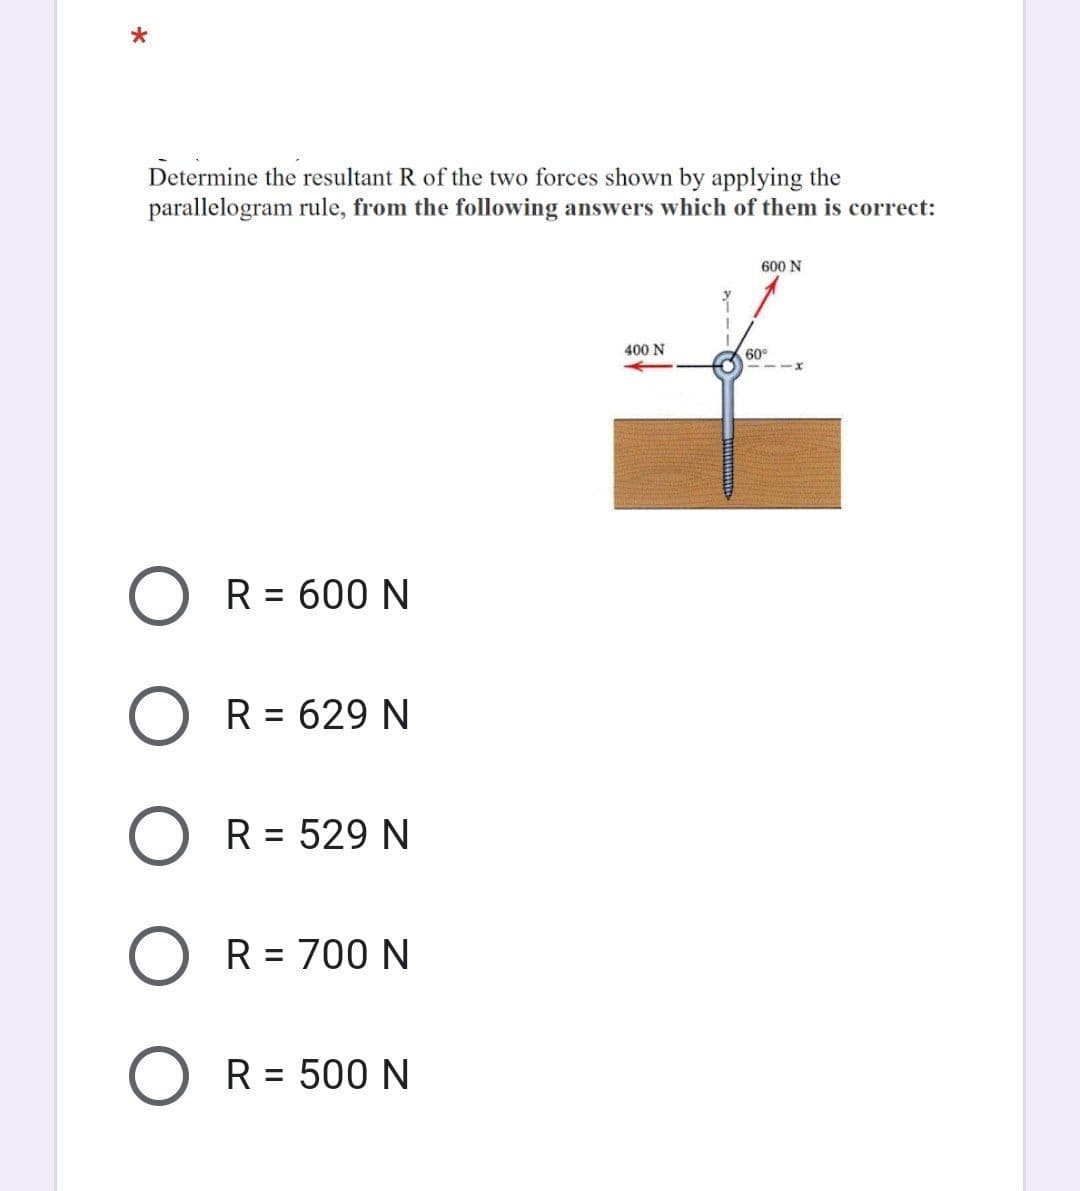 Determine the resultant R of the two forces shown by applying the
parallelogram rule, from the following answers which of them is correct:
600 N
400 N
60°
R = 600 N
R = 629 N
R = 529 N
%3D
R = 700 N
R = 500 N
%3|
